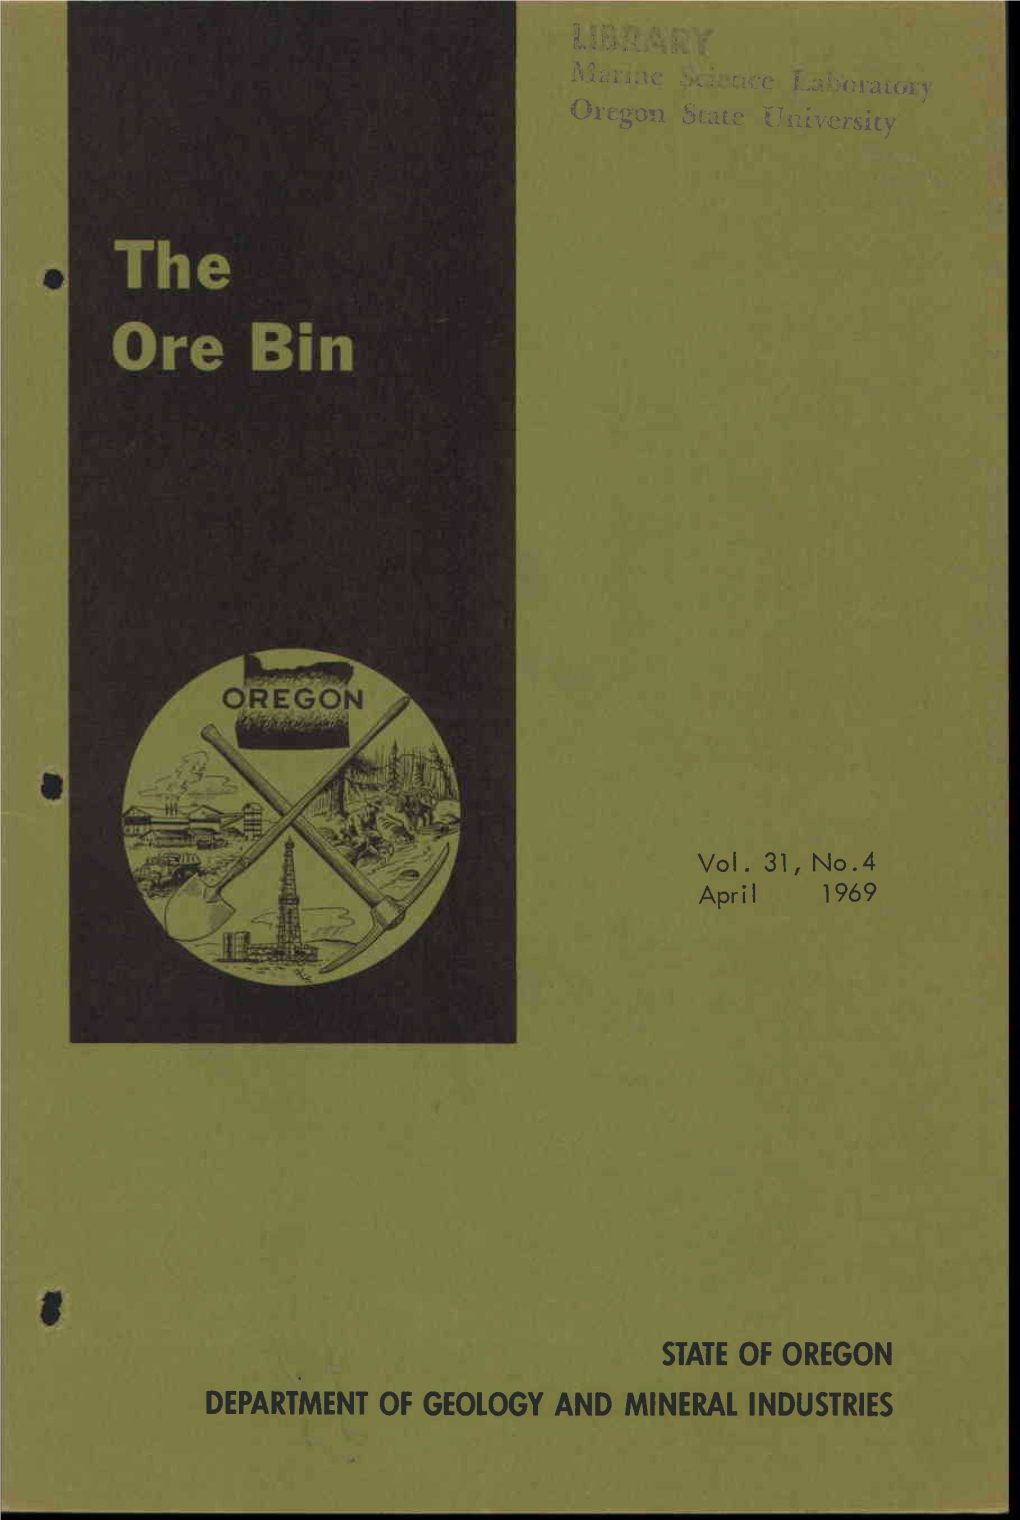 STATE of OREGON DEPARTMENT of GEOLOGY and MINERAL INDUSTRIES the Ore Bin